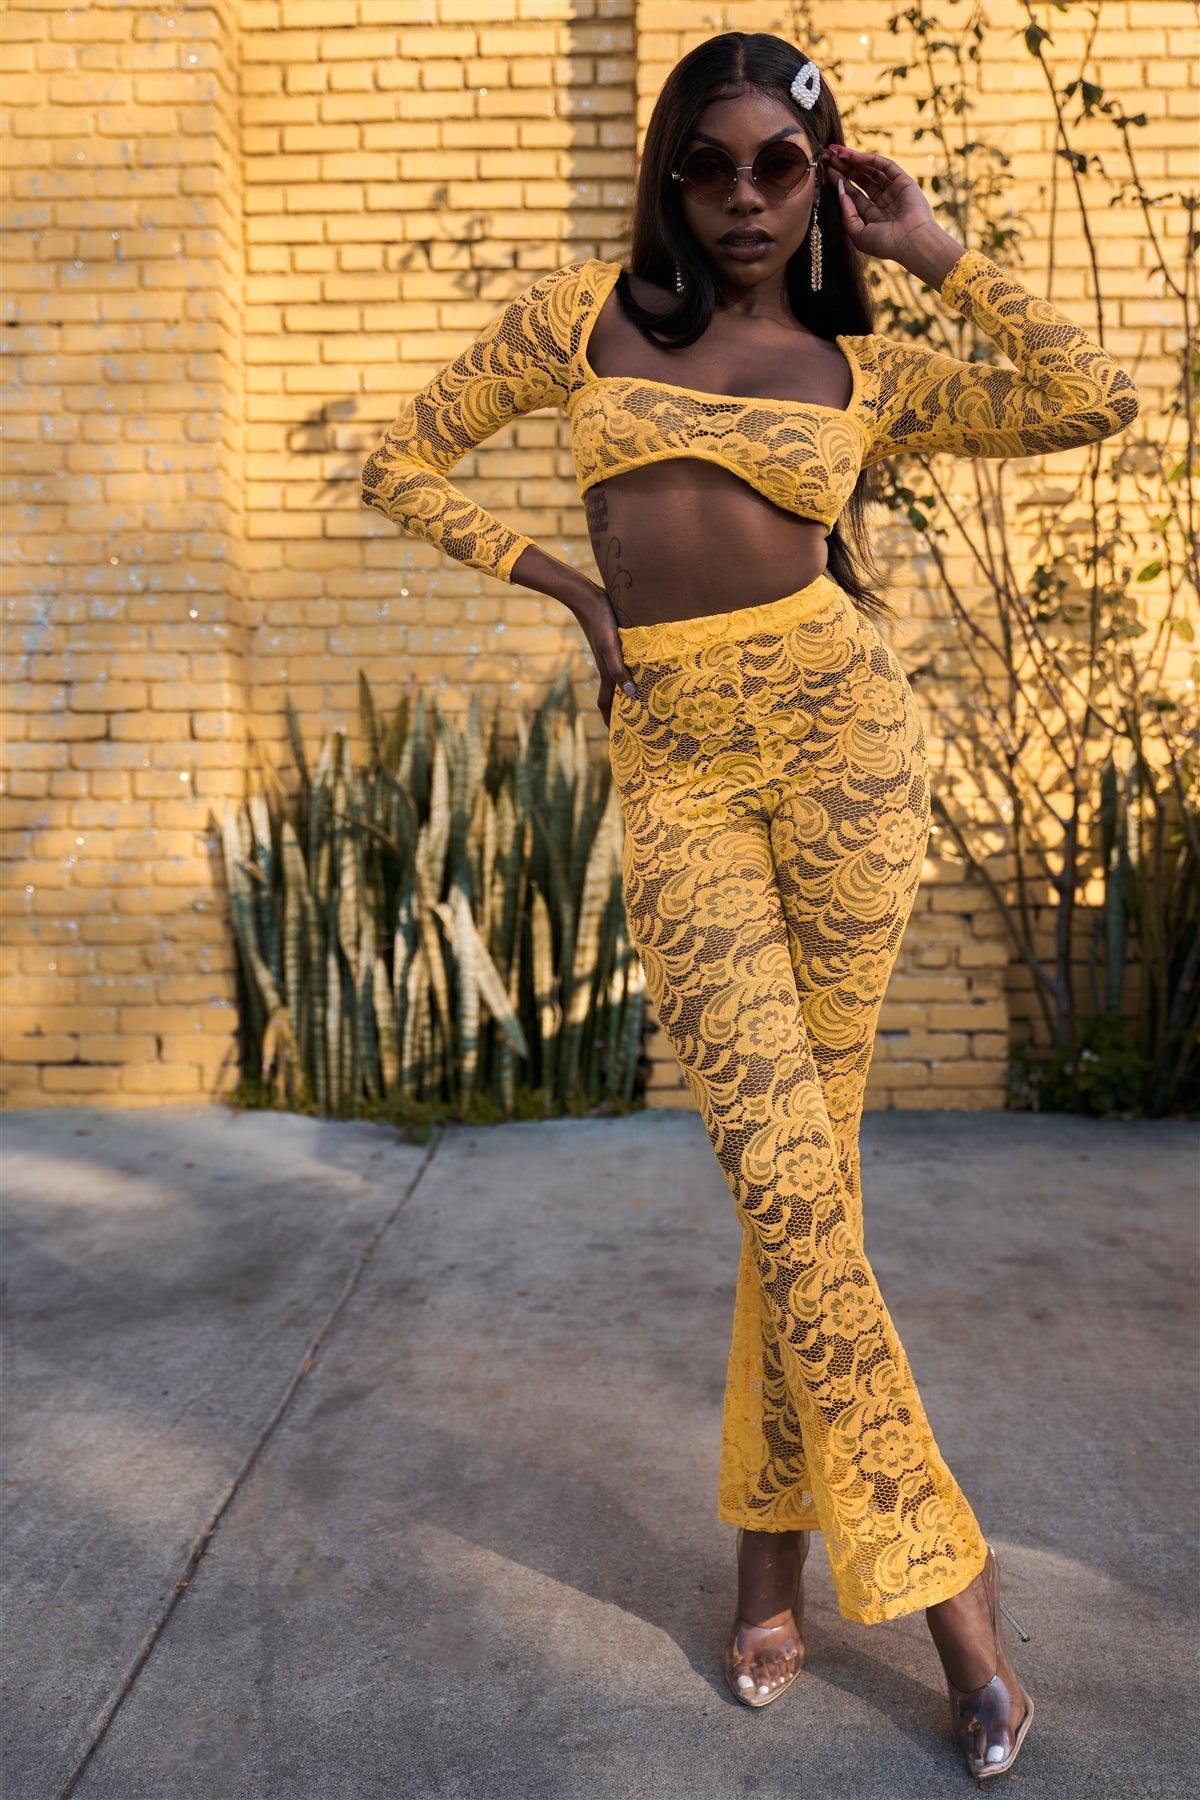 Yellow Sheer Floral Lace Crop Square Neck Top & High Waist Flare Pant Set /3-2-1